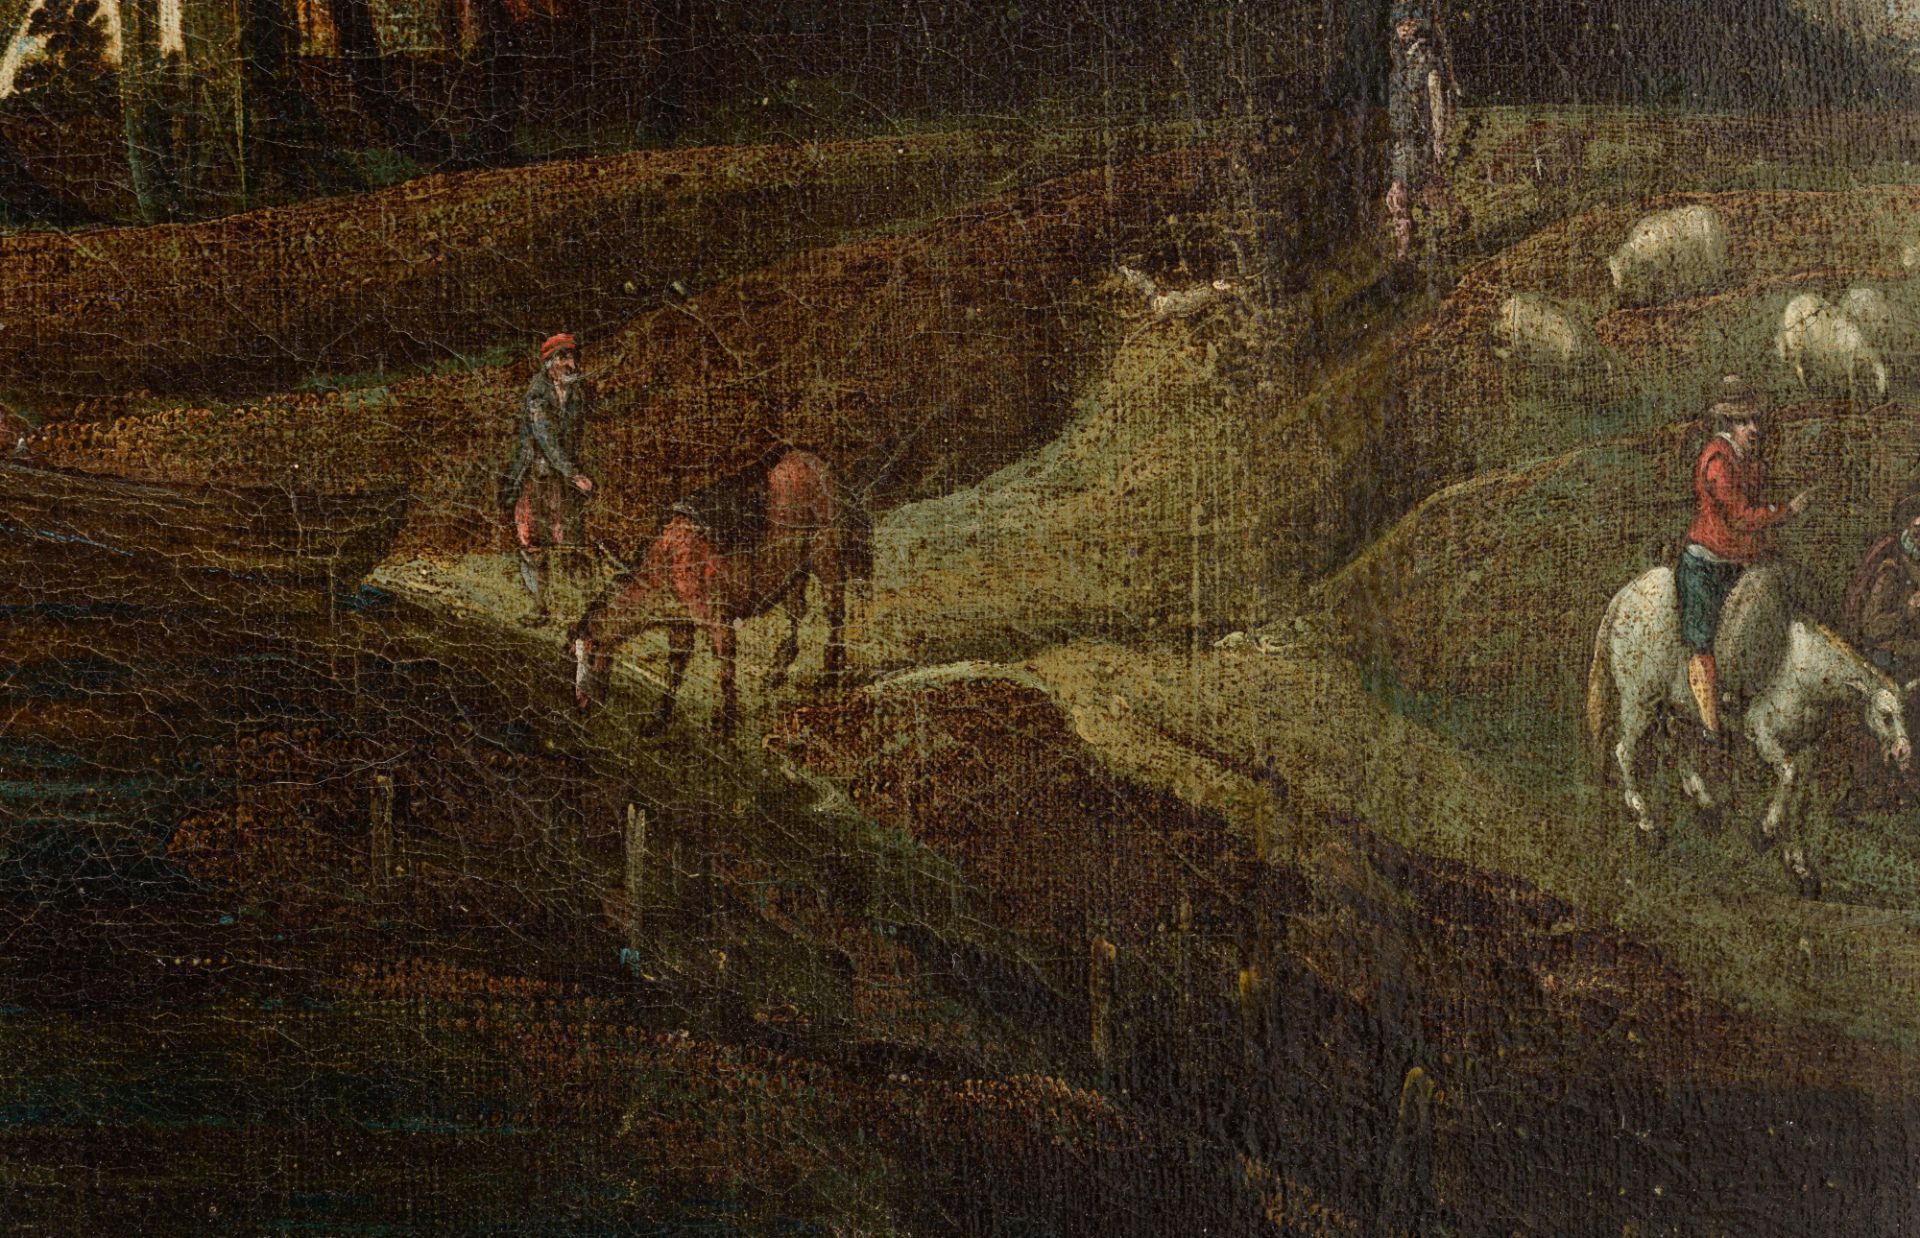 No visible signature, Cephalus and Procris in a landscape, the Southern Netherlands, late 16thC - ea - Image 8 of 11